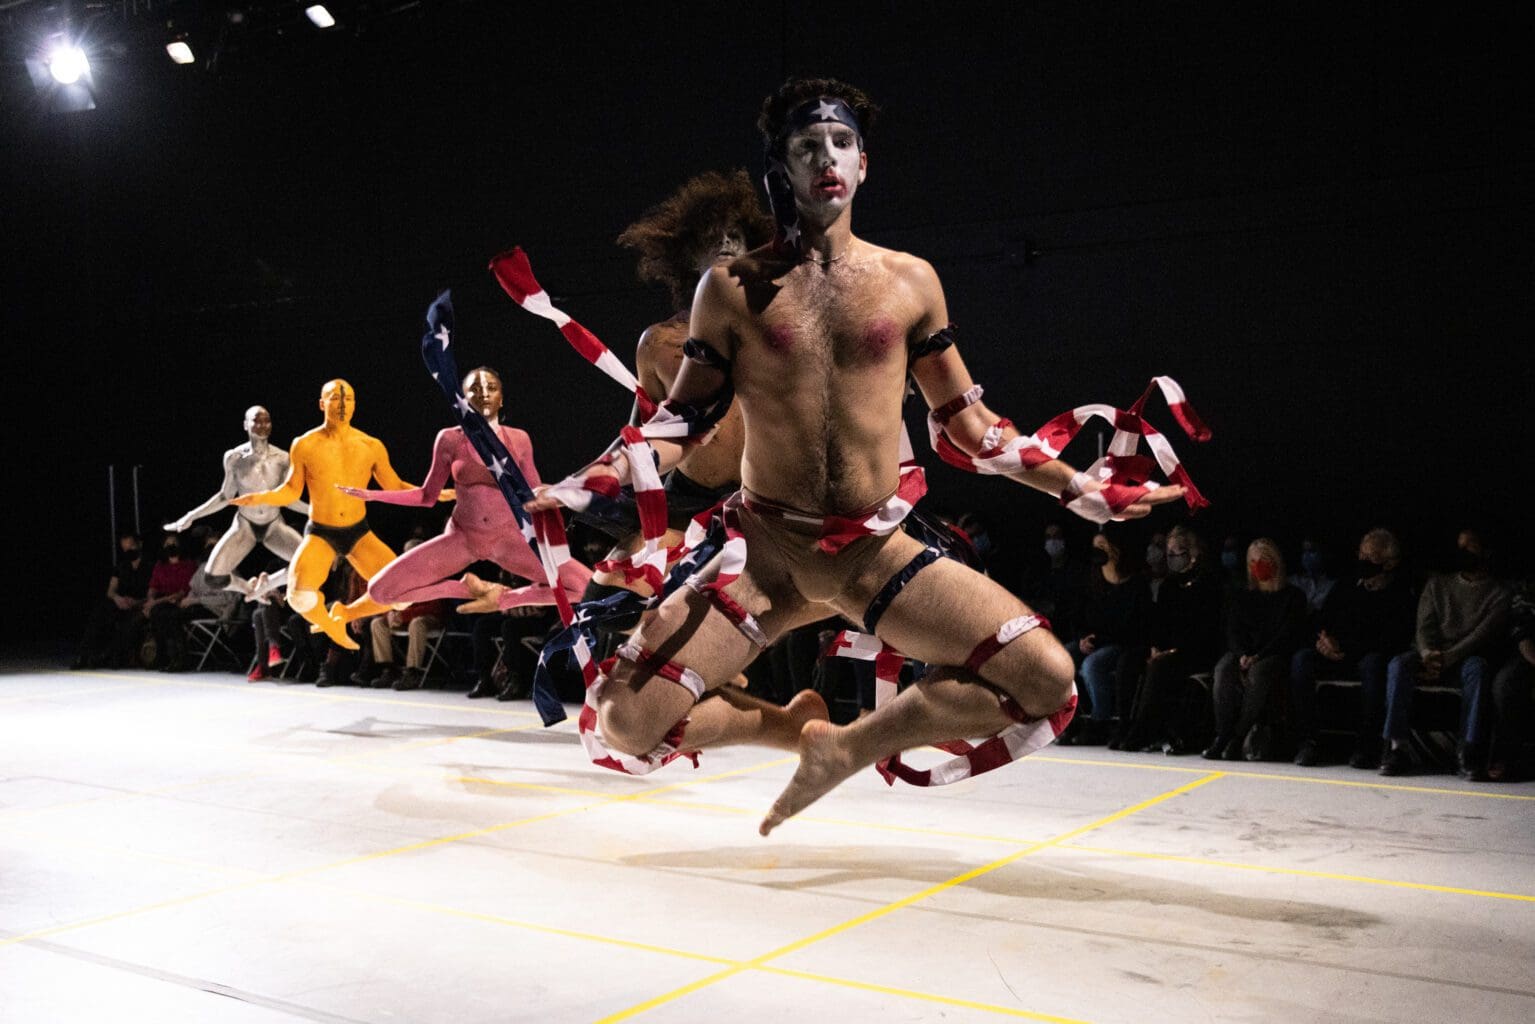 A line of dancers performs on a floor level white stage with the audience in the background. The performers are wearing body paint, minimal clothing, with the closest dancer wearing American flag ribbons on their body. The dancers are in a dynamic pose, caught jumping in the air with their legs tucked underneath themselves.